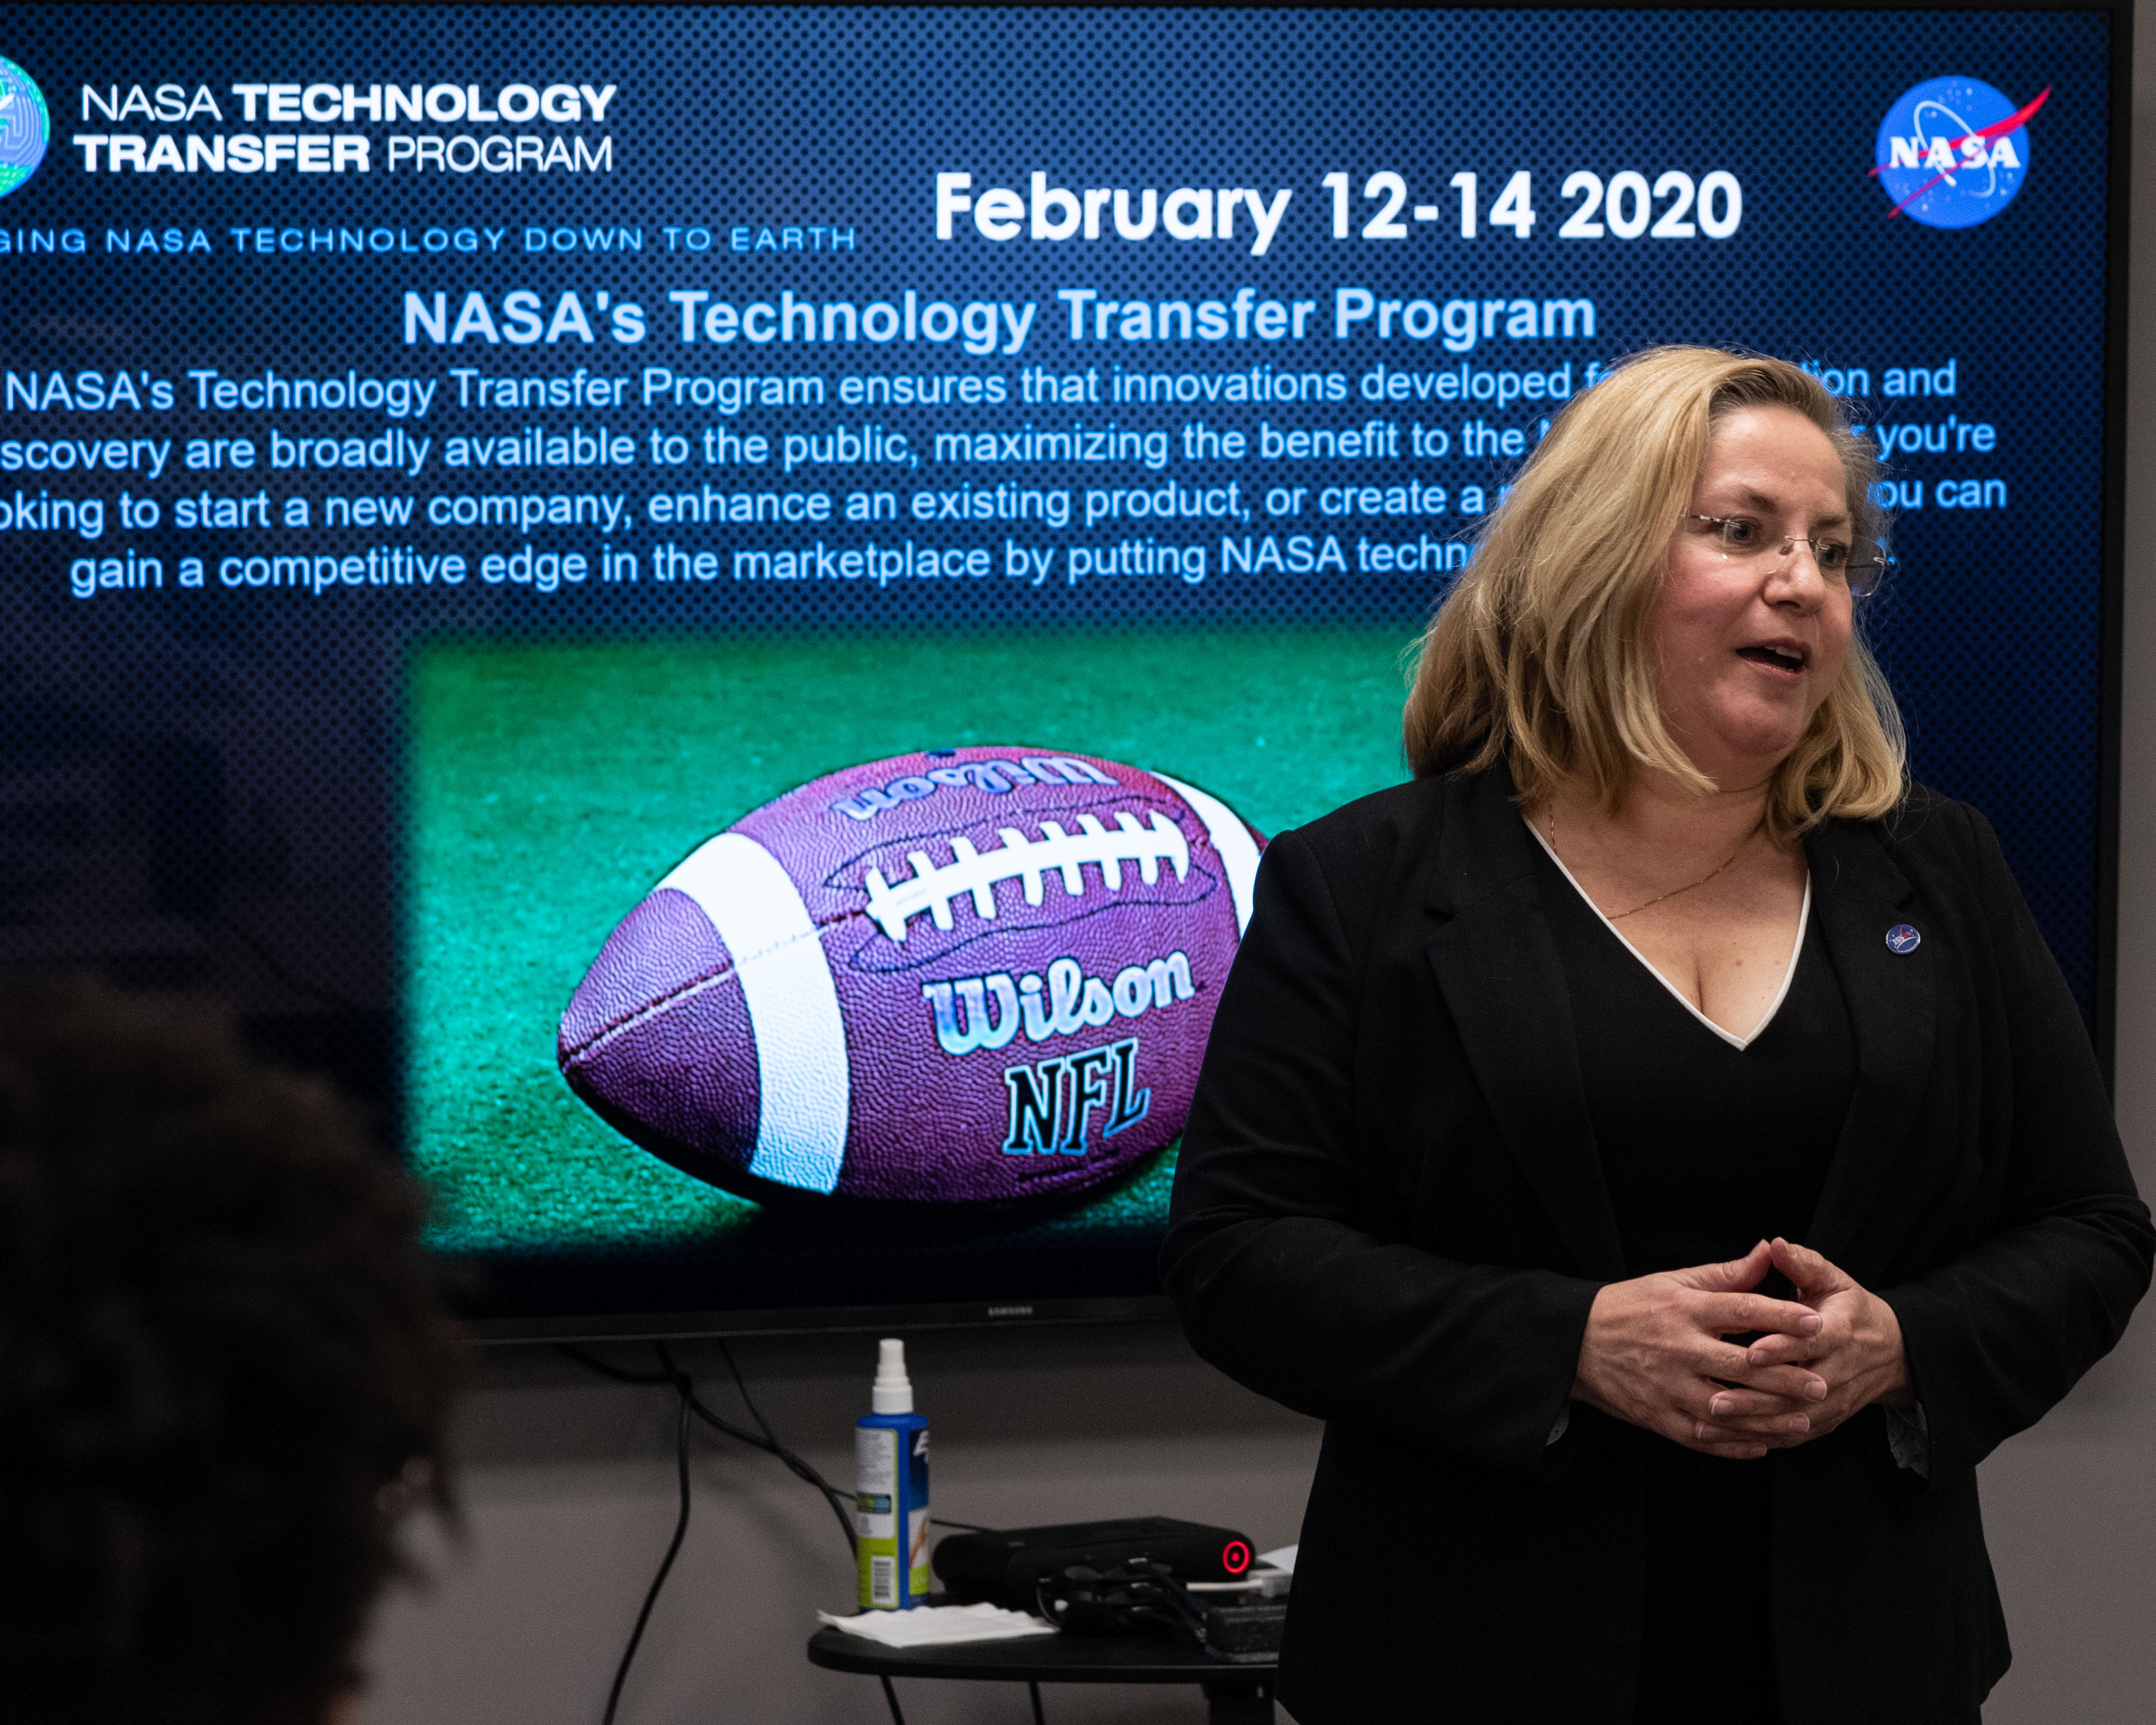 NASA’s Johnson Space Center Associate Director Donna Shafer discusses the importance of technology and innovation.